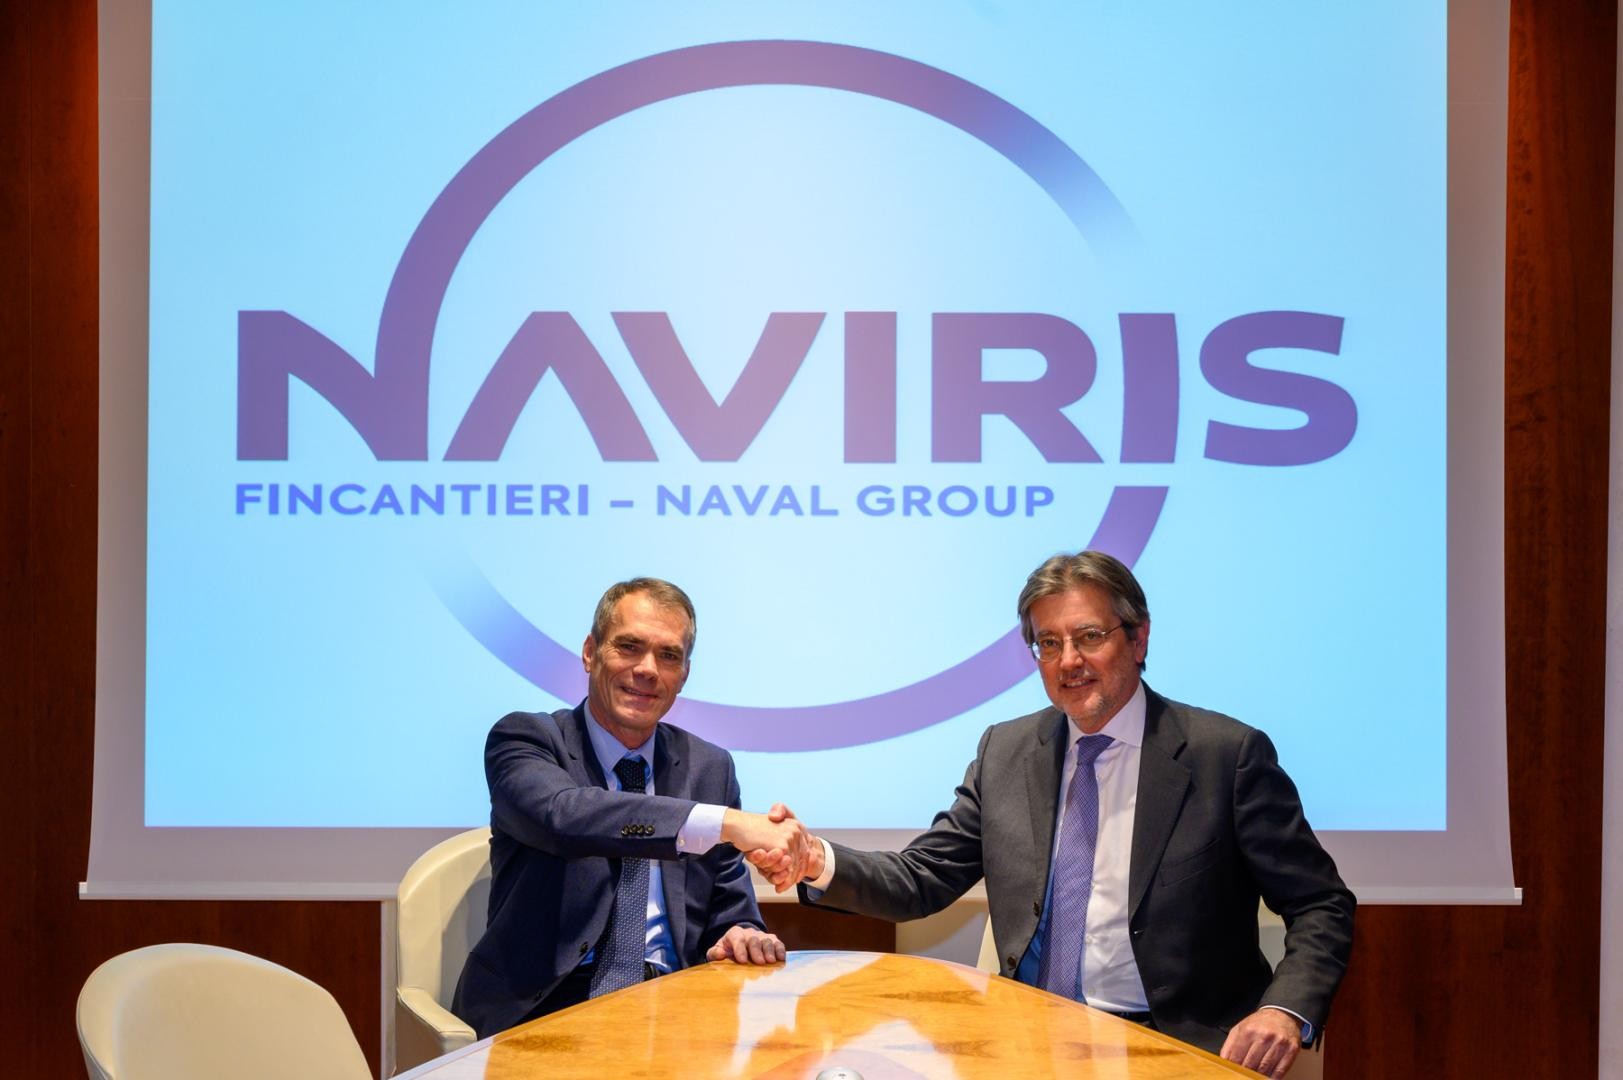 Naviris, the JV between Fincantieri and Naval Group is now fully operational